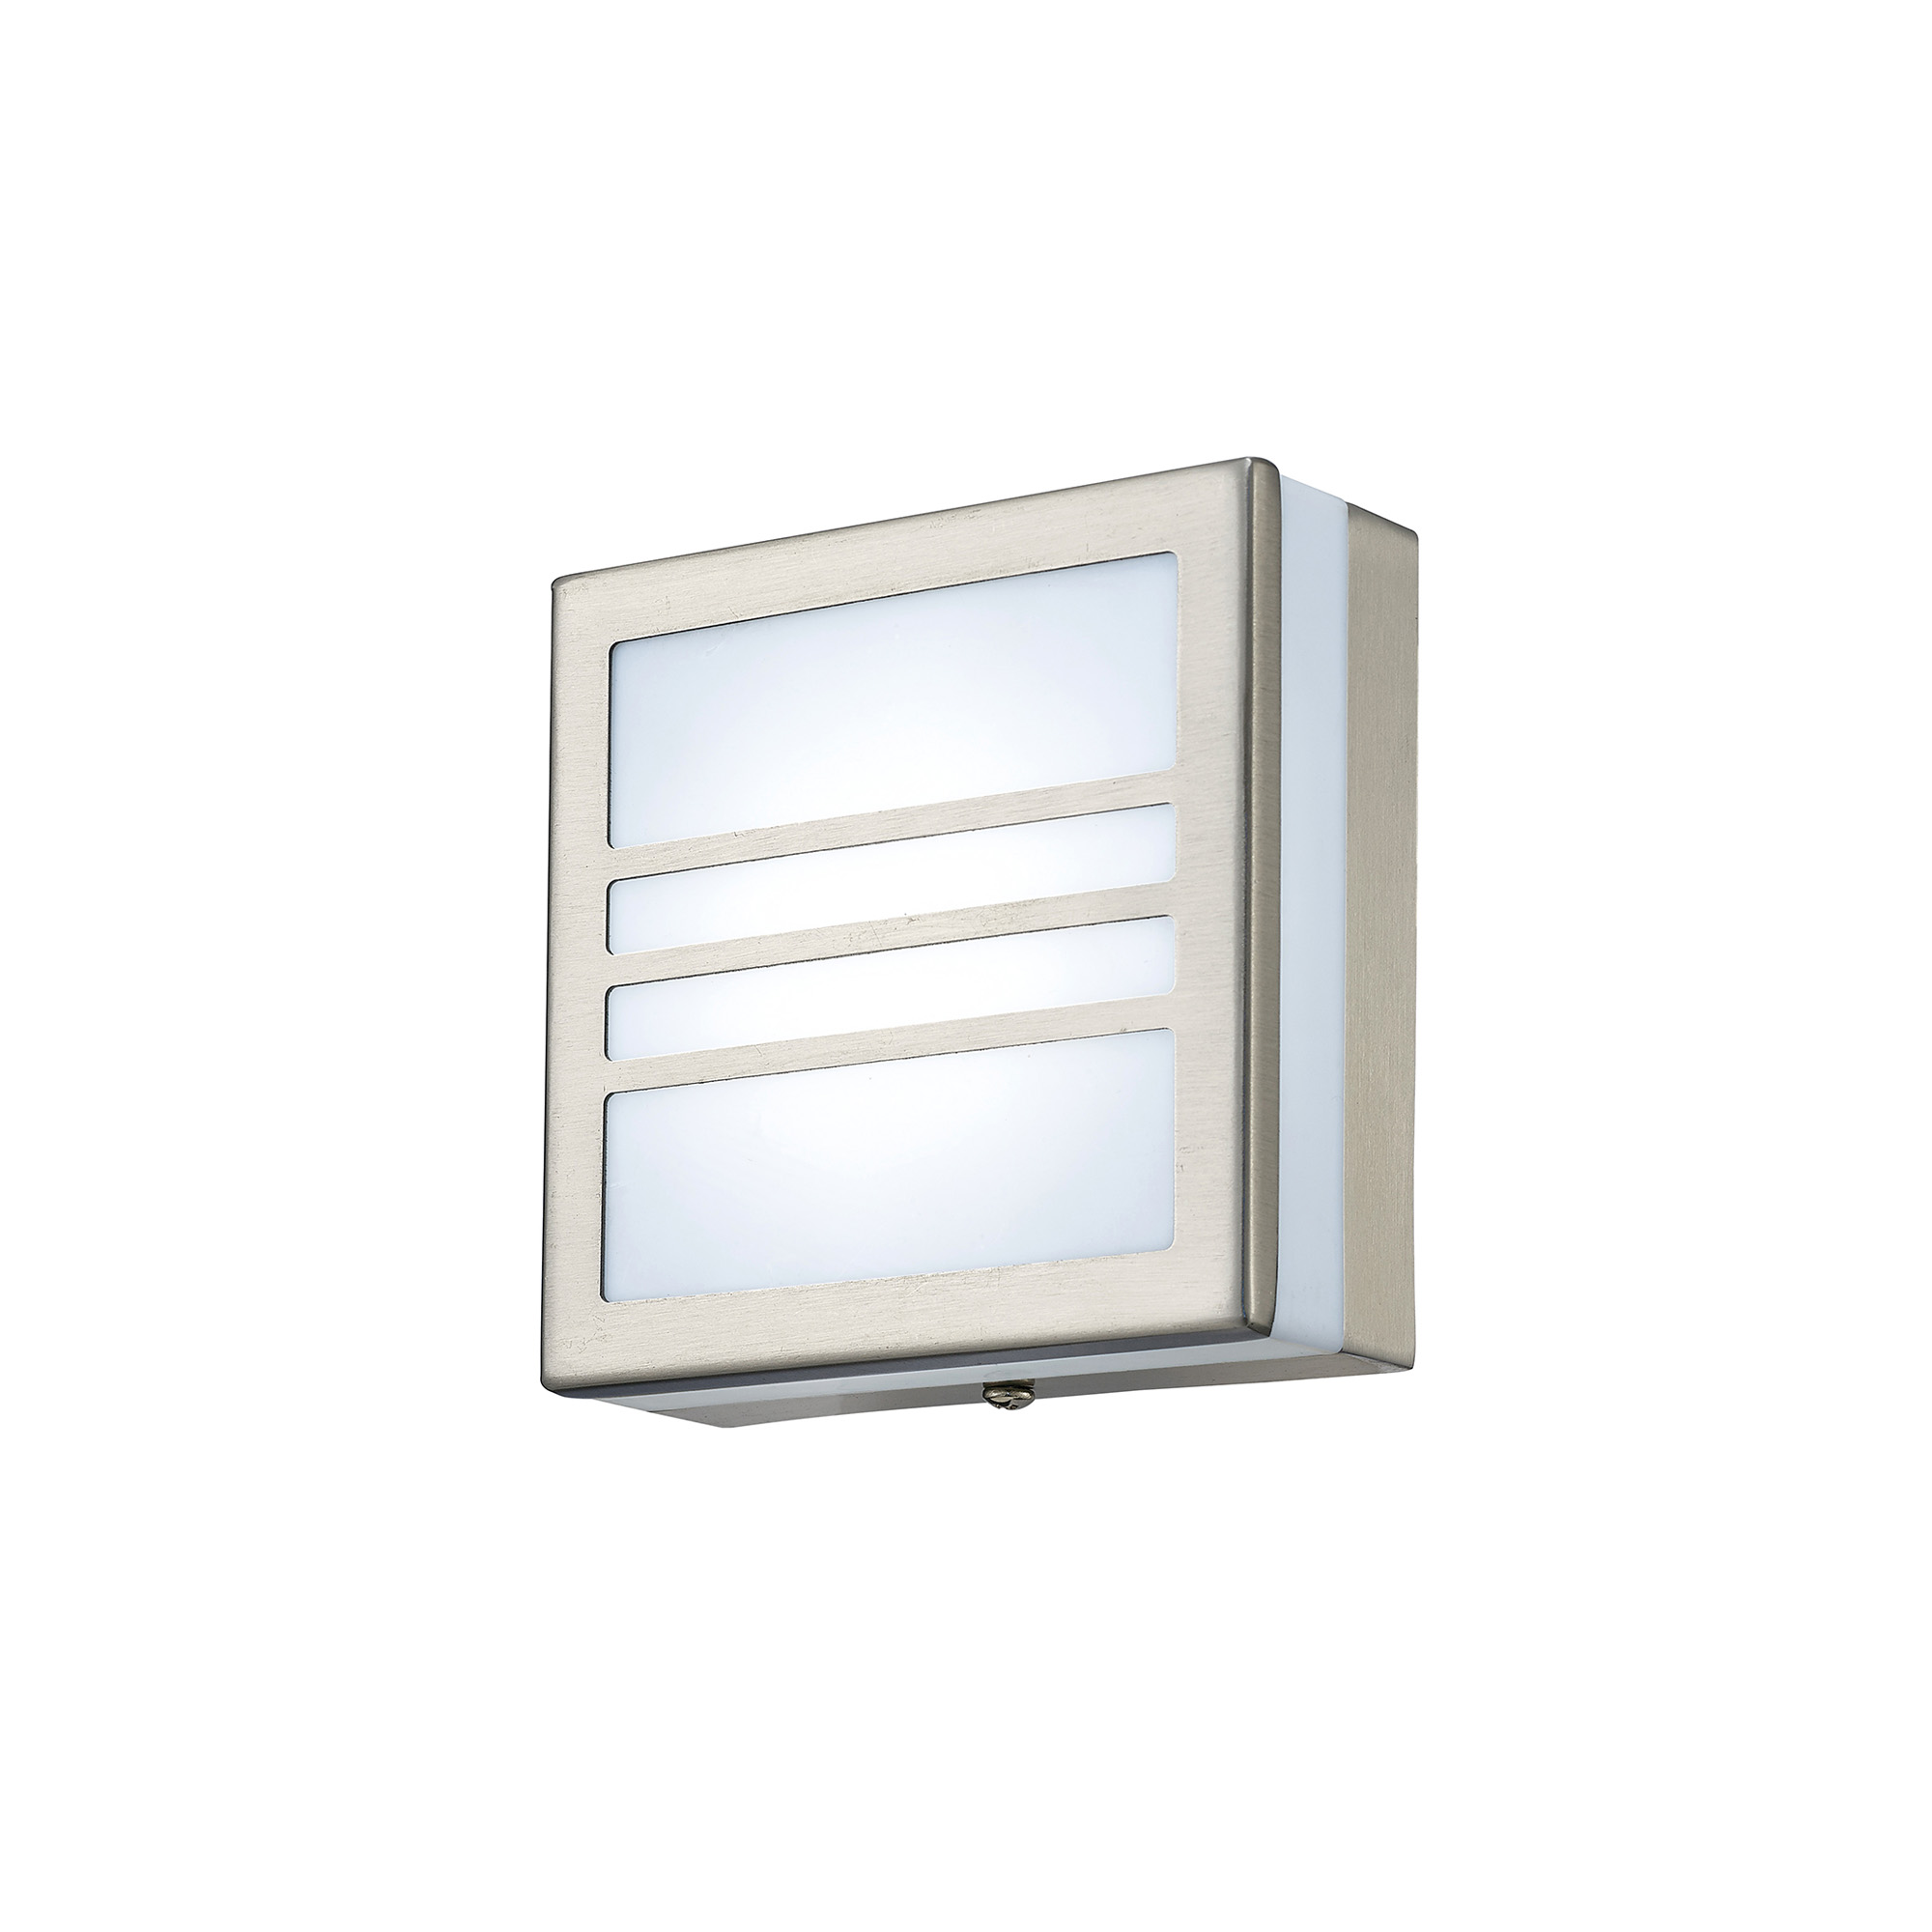 D0082  Aldo IP44 2.4W LED Square Wall Lamp Stainless Steel